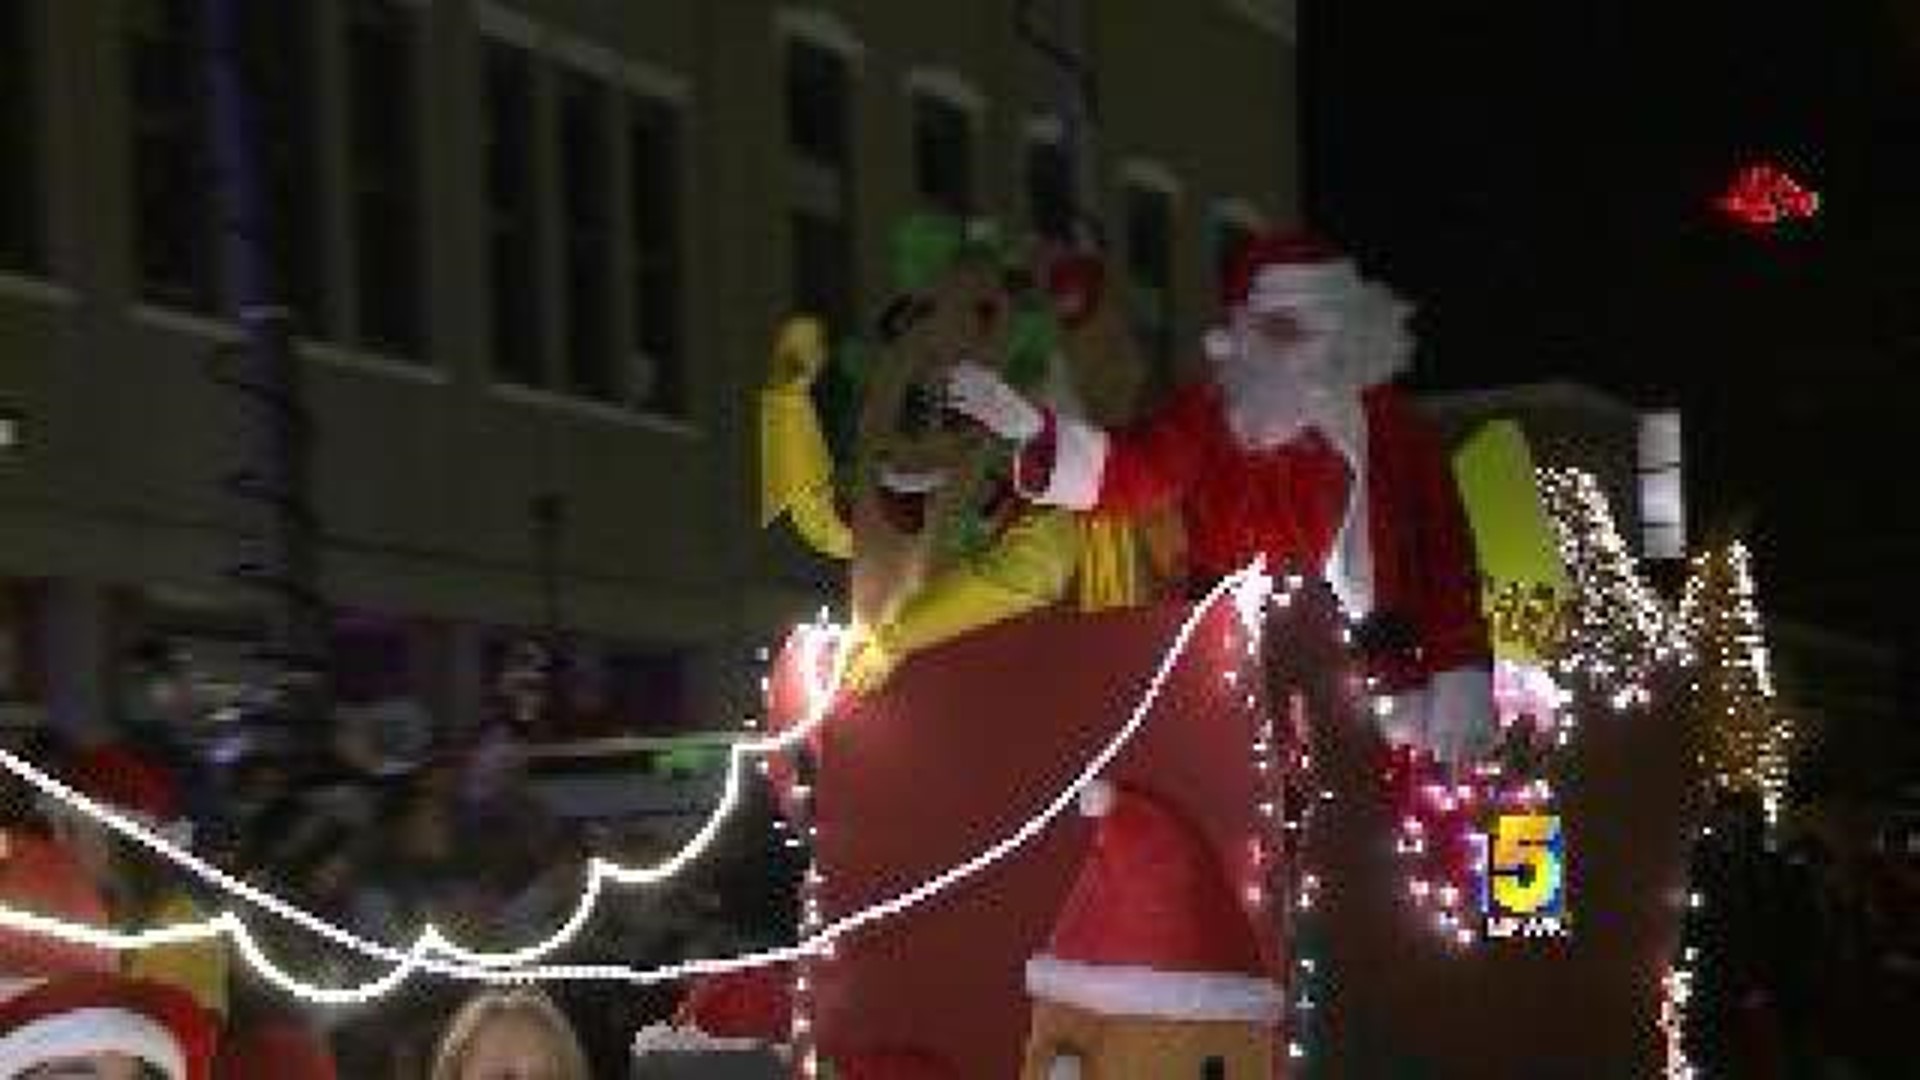 The 20th Annual Lights of the Ozarks